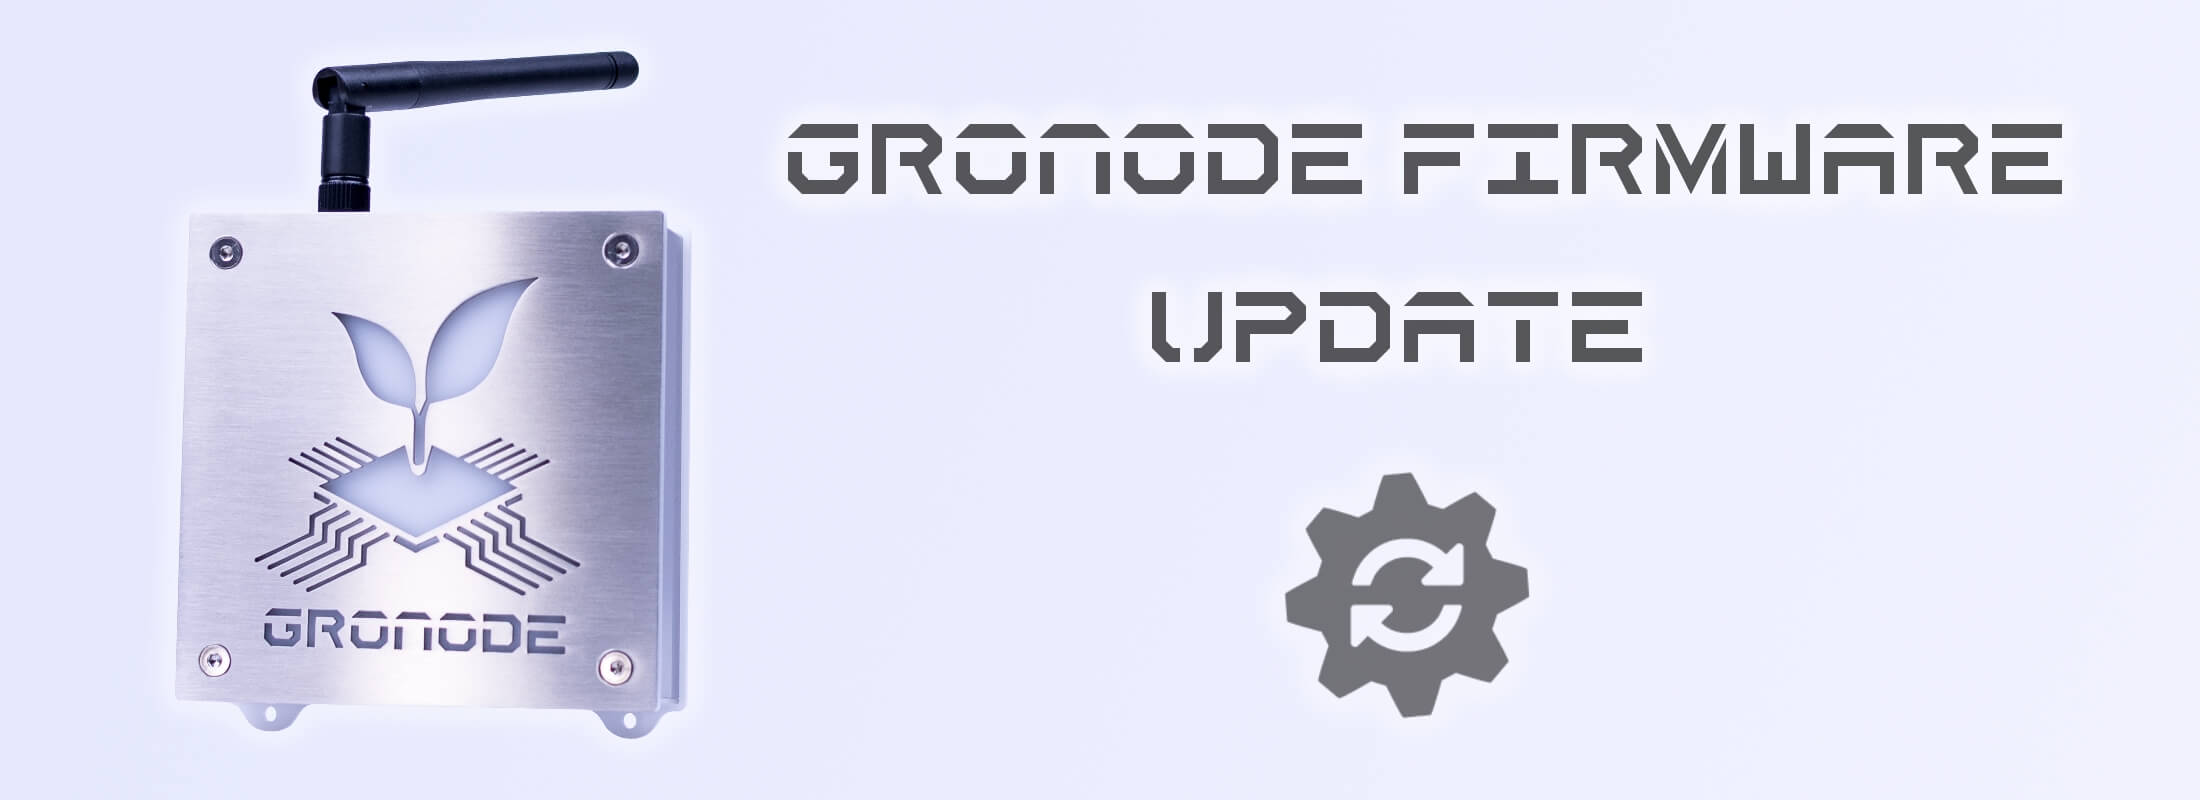 On the left side a front view of GroNode, the core module (brain) of the GroLab™ grow controller, on the right the text "GroNode Firmware Update" and an update icon